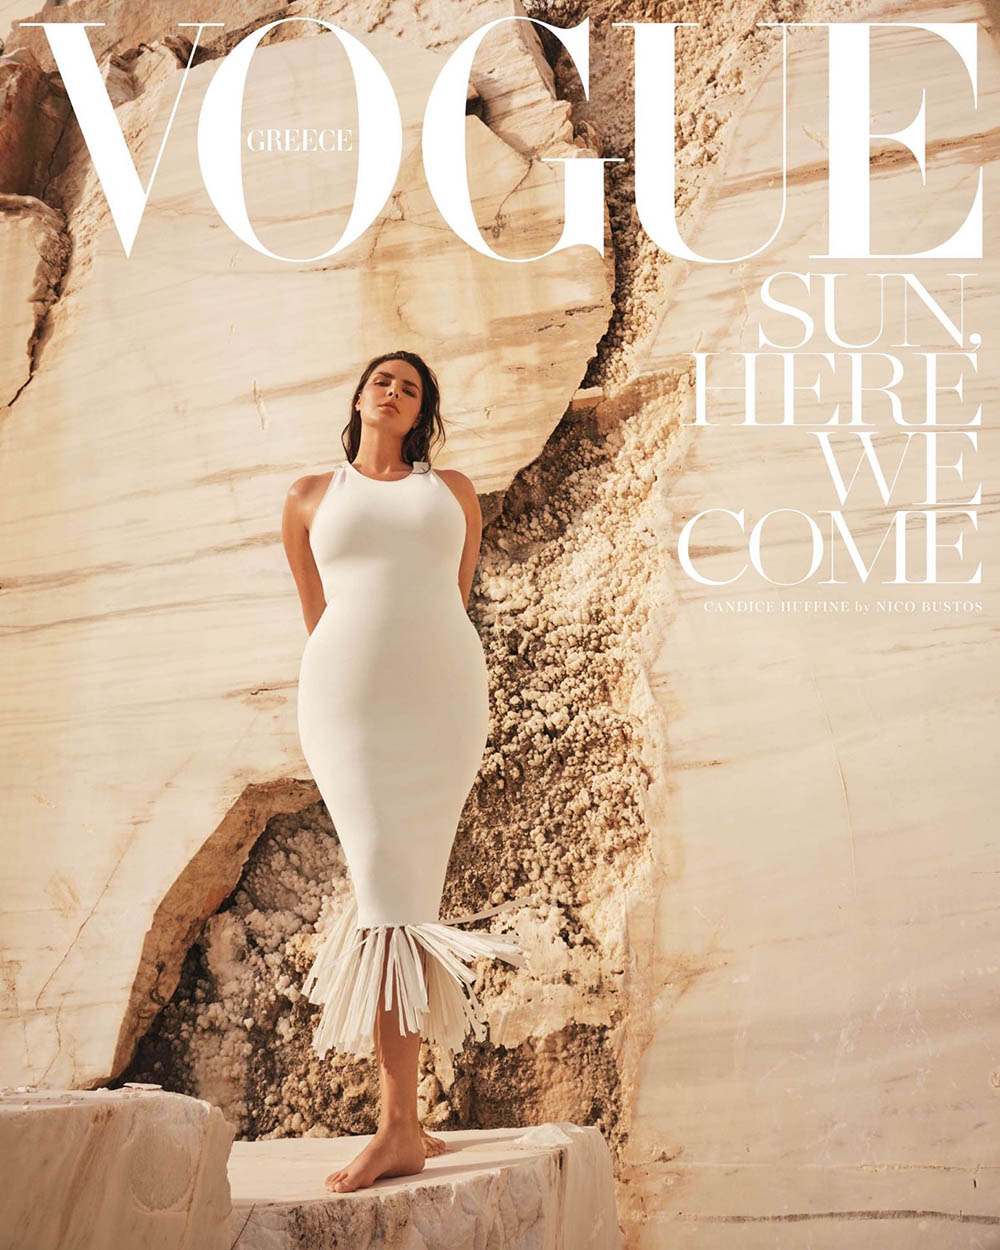 Candice Huffine covers Vogue Greece June 2020 by Nico Bustos